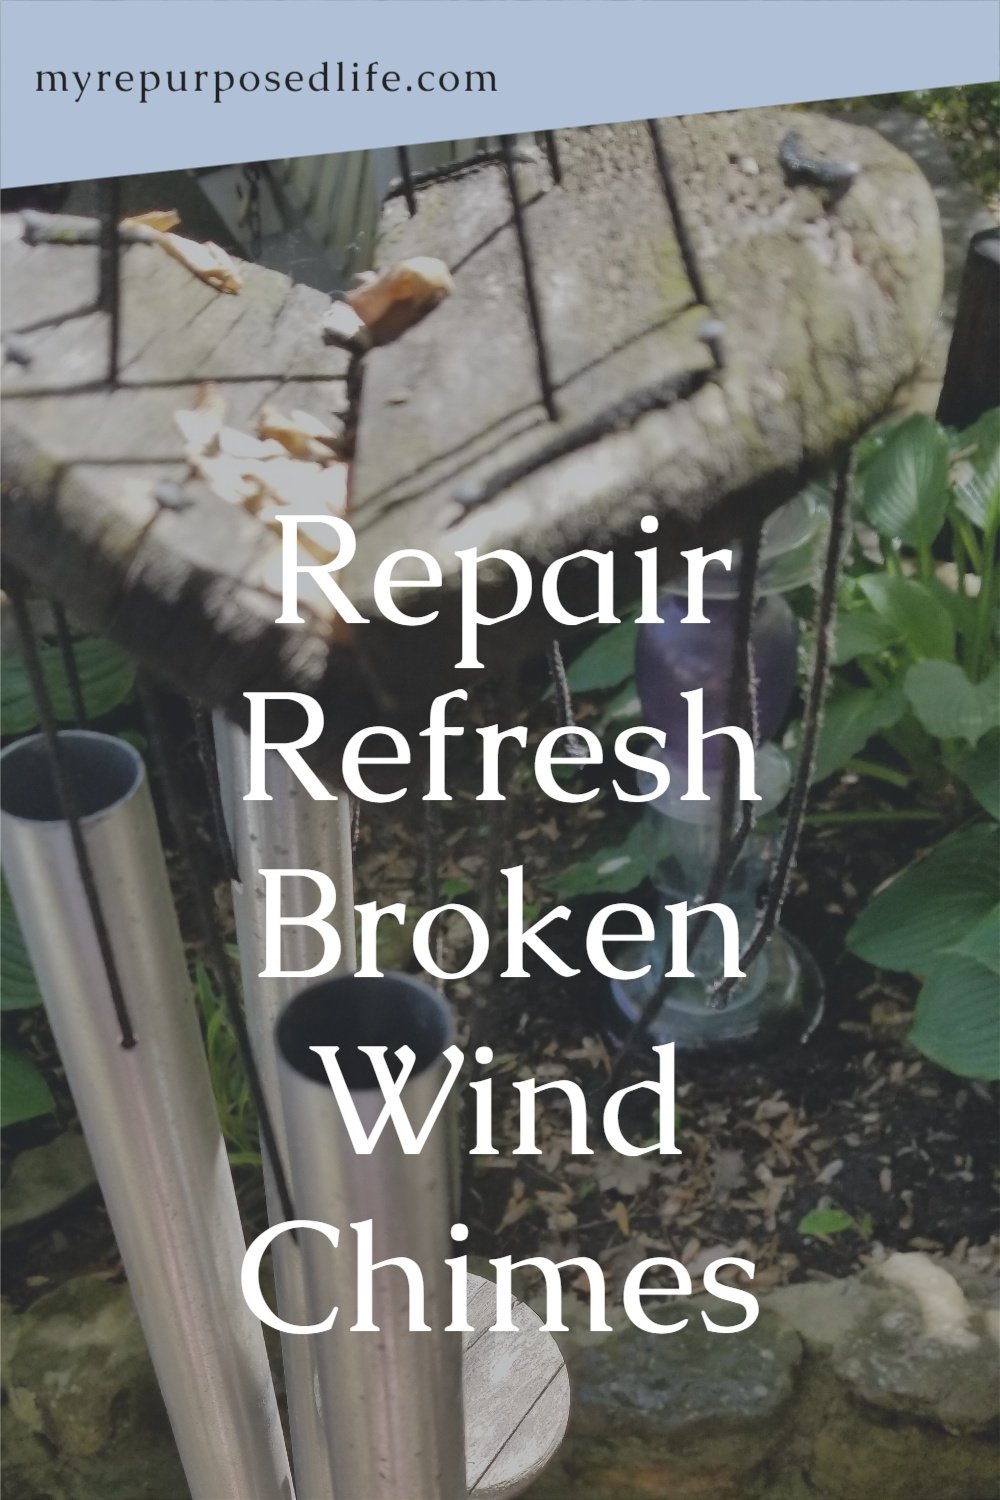 save the wind chimes How to restring and repair your favorite wind chimes. Tips for painting, and repairing.#MyRepurposedLife #repurposed #outdoors #windchime via @repurposedlife